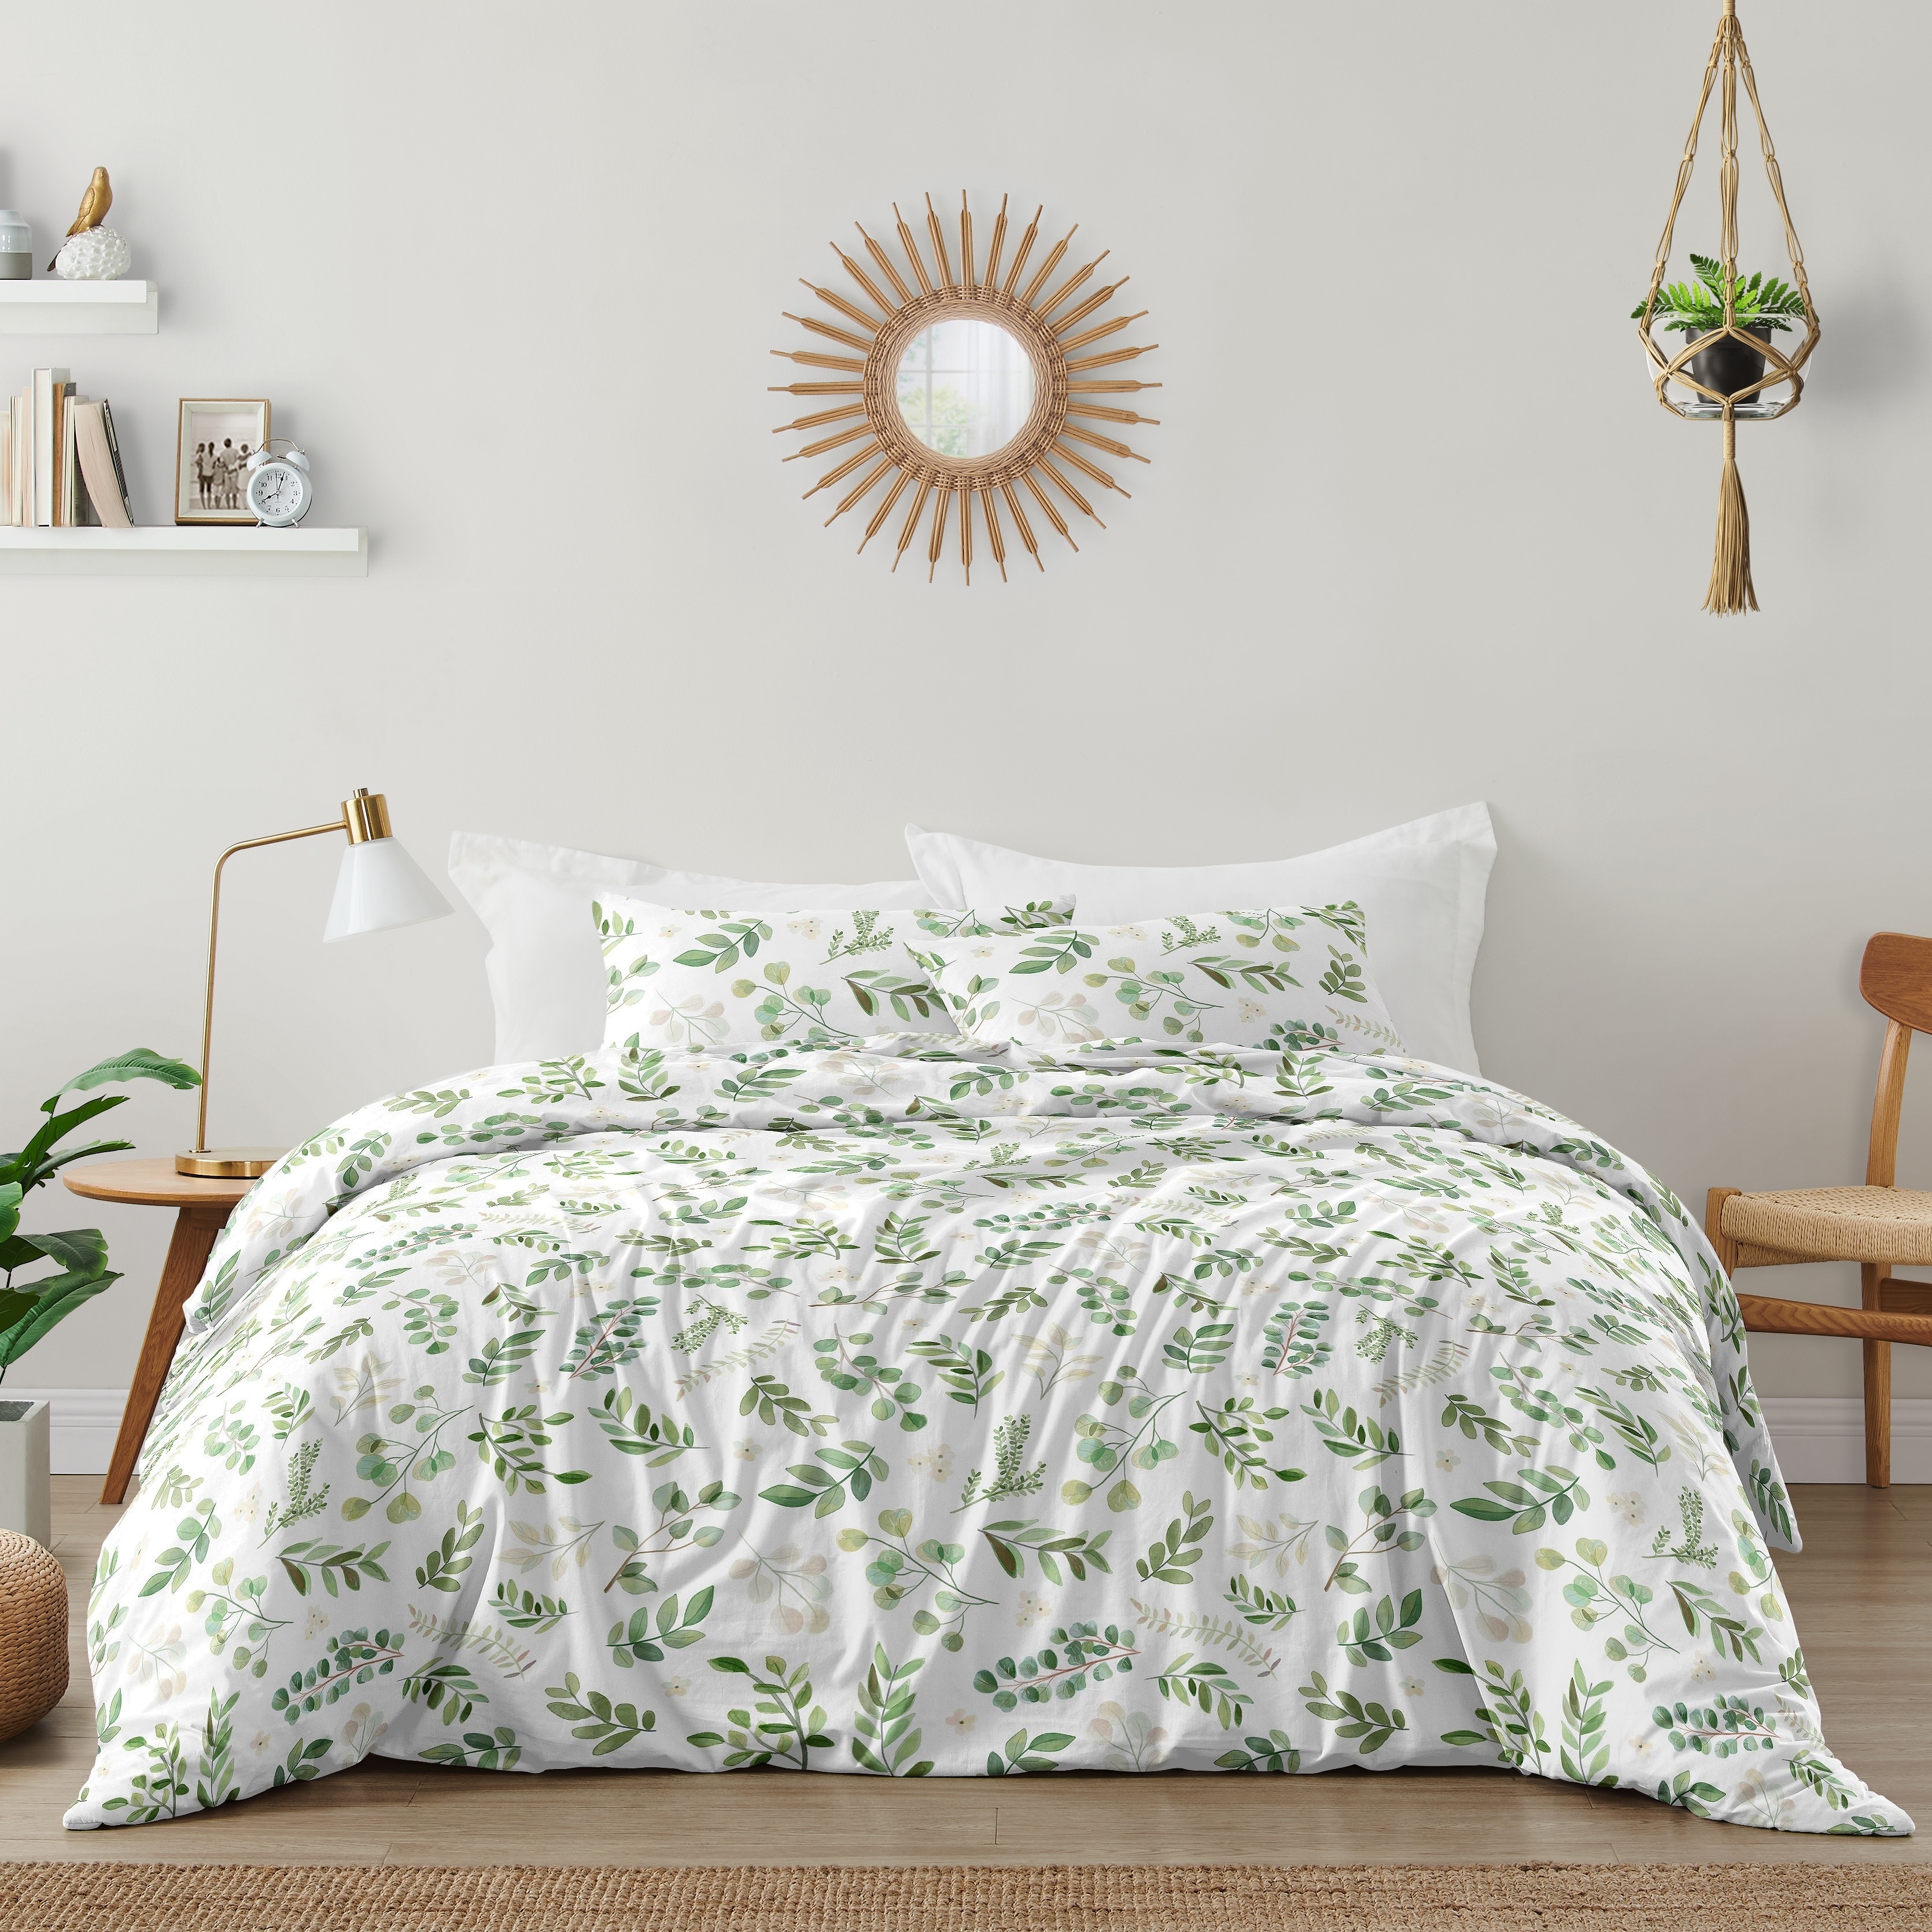 Floral Leaf Collection Girl 3pc Full Queen-size Comforter Set Green  White Boho Watercolor Botanical Woodland Tropical Garden Bed Bath   Beyond 32007649